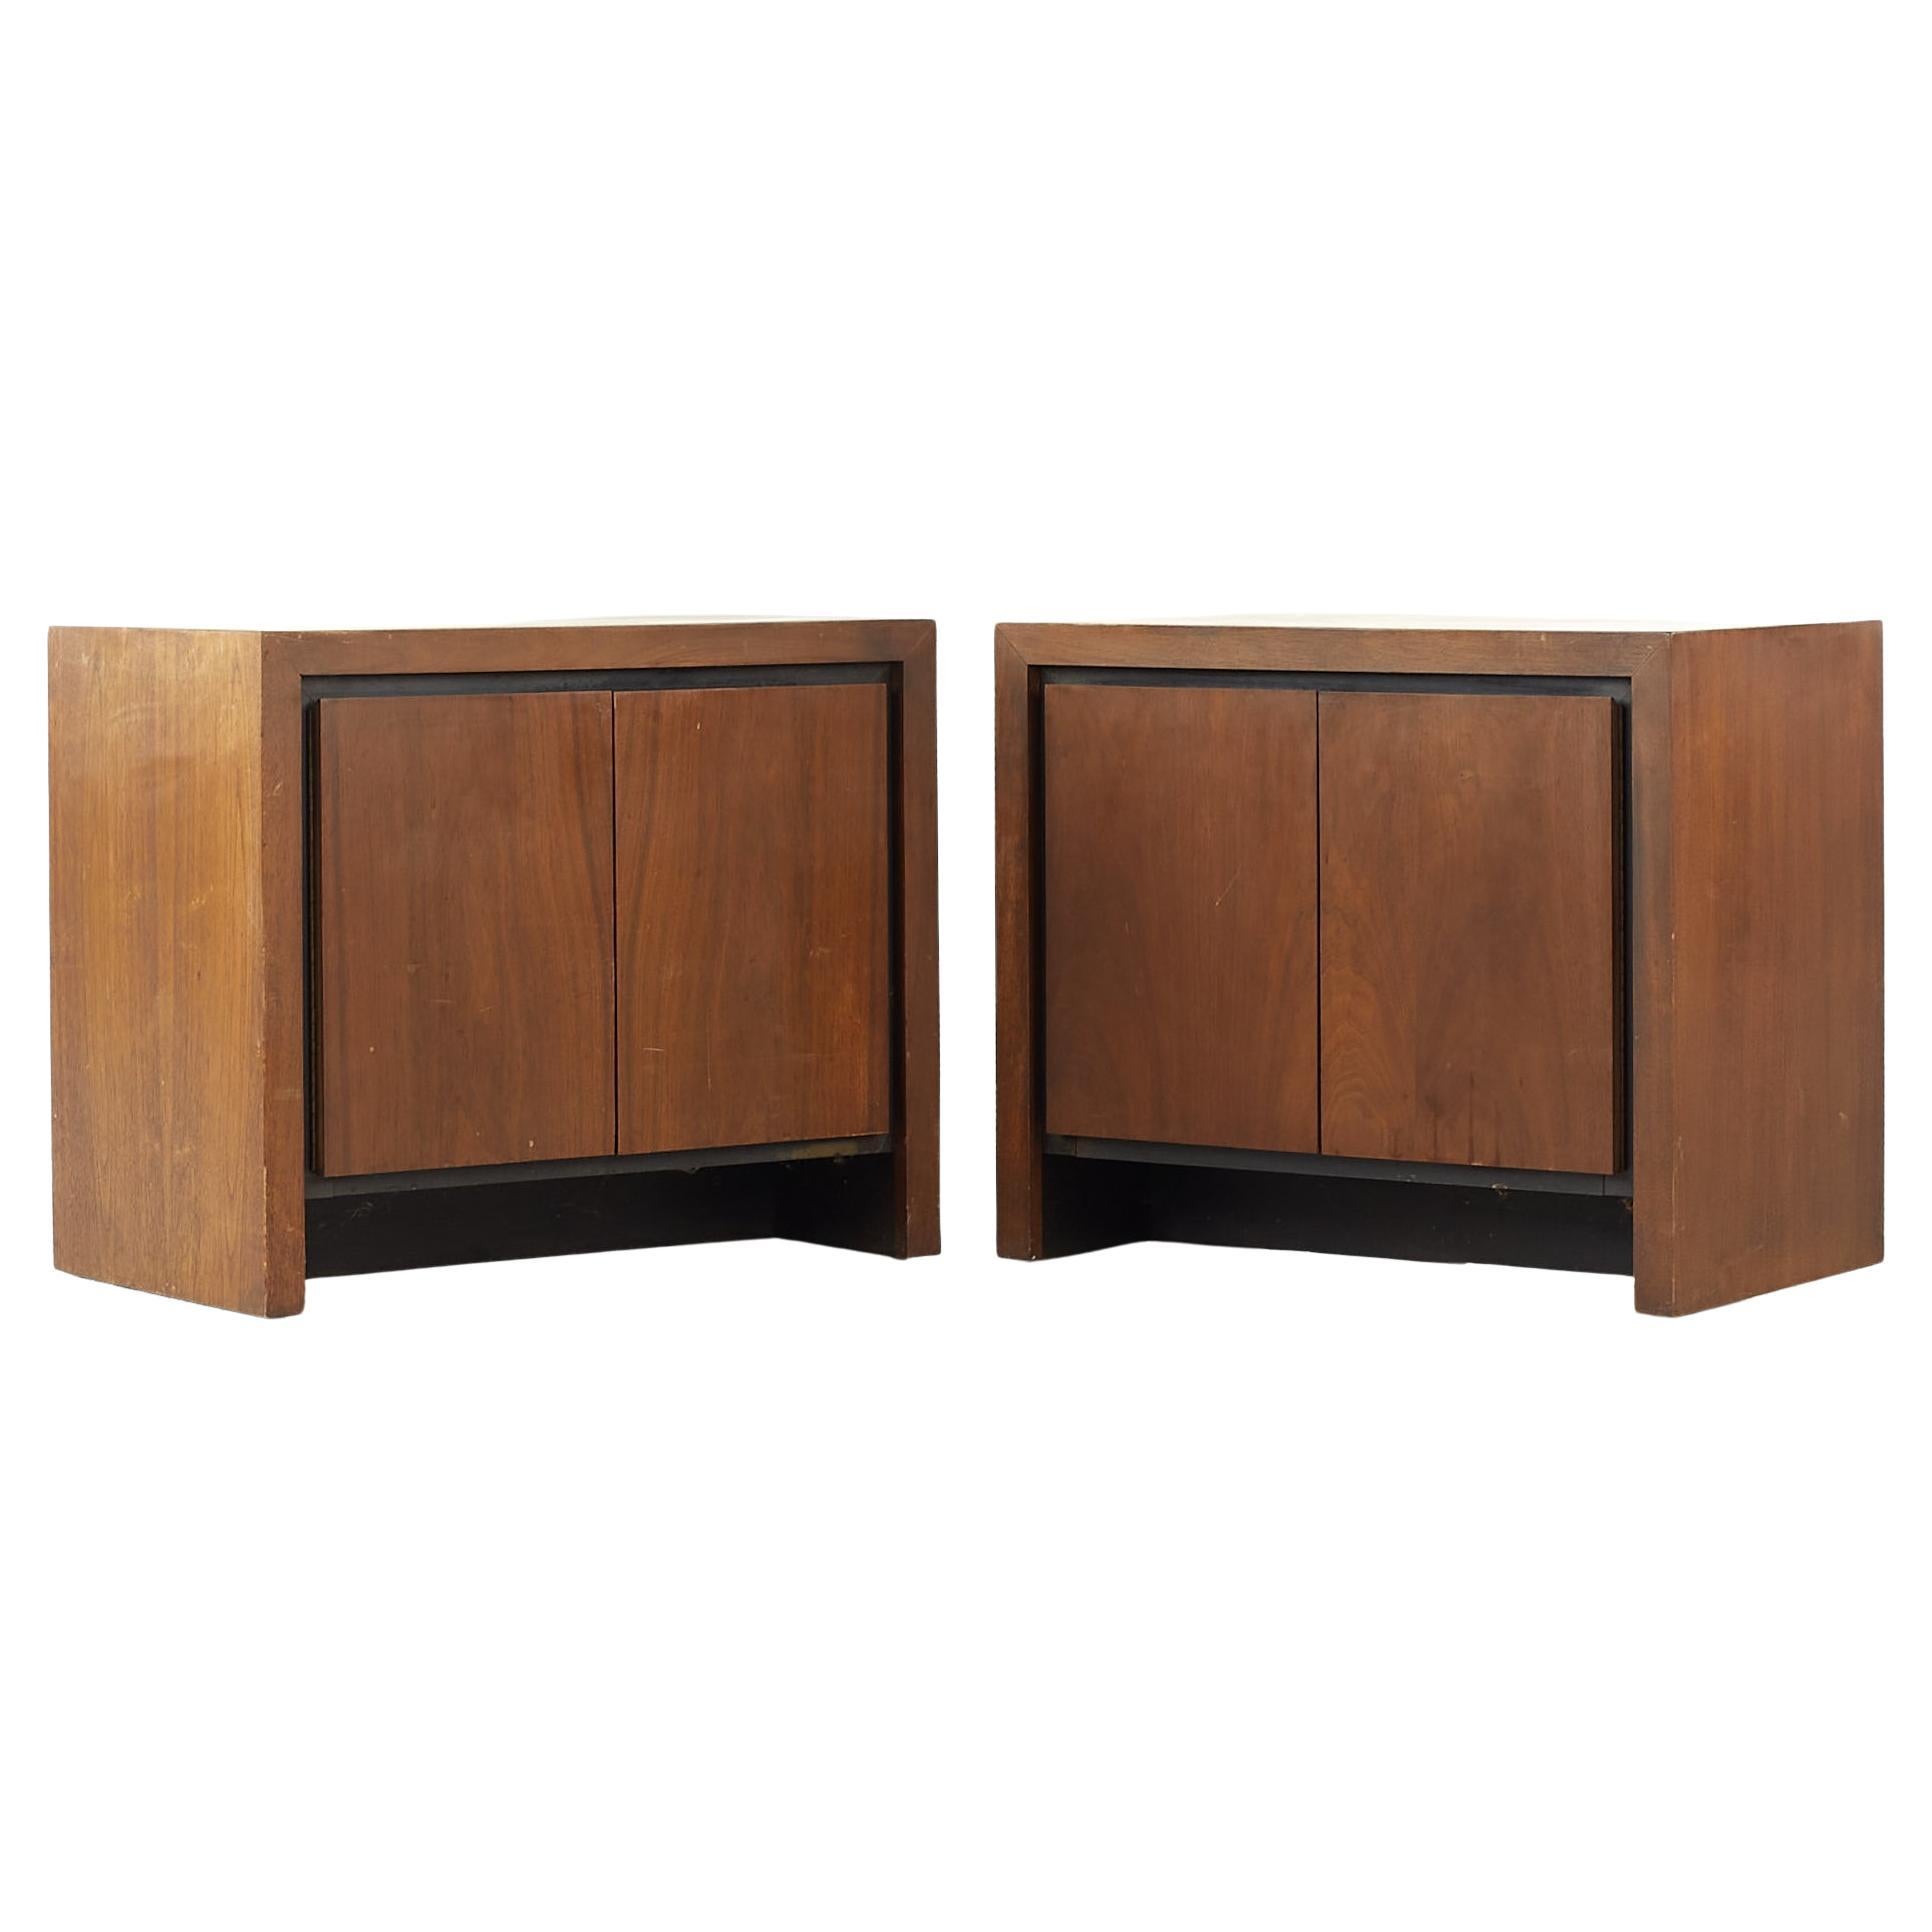 Dillingham Mid Century Bookmatched Nightstands, Pair